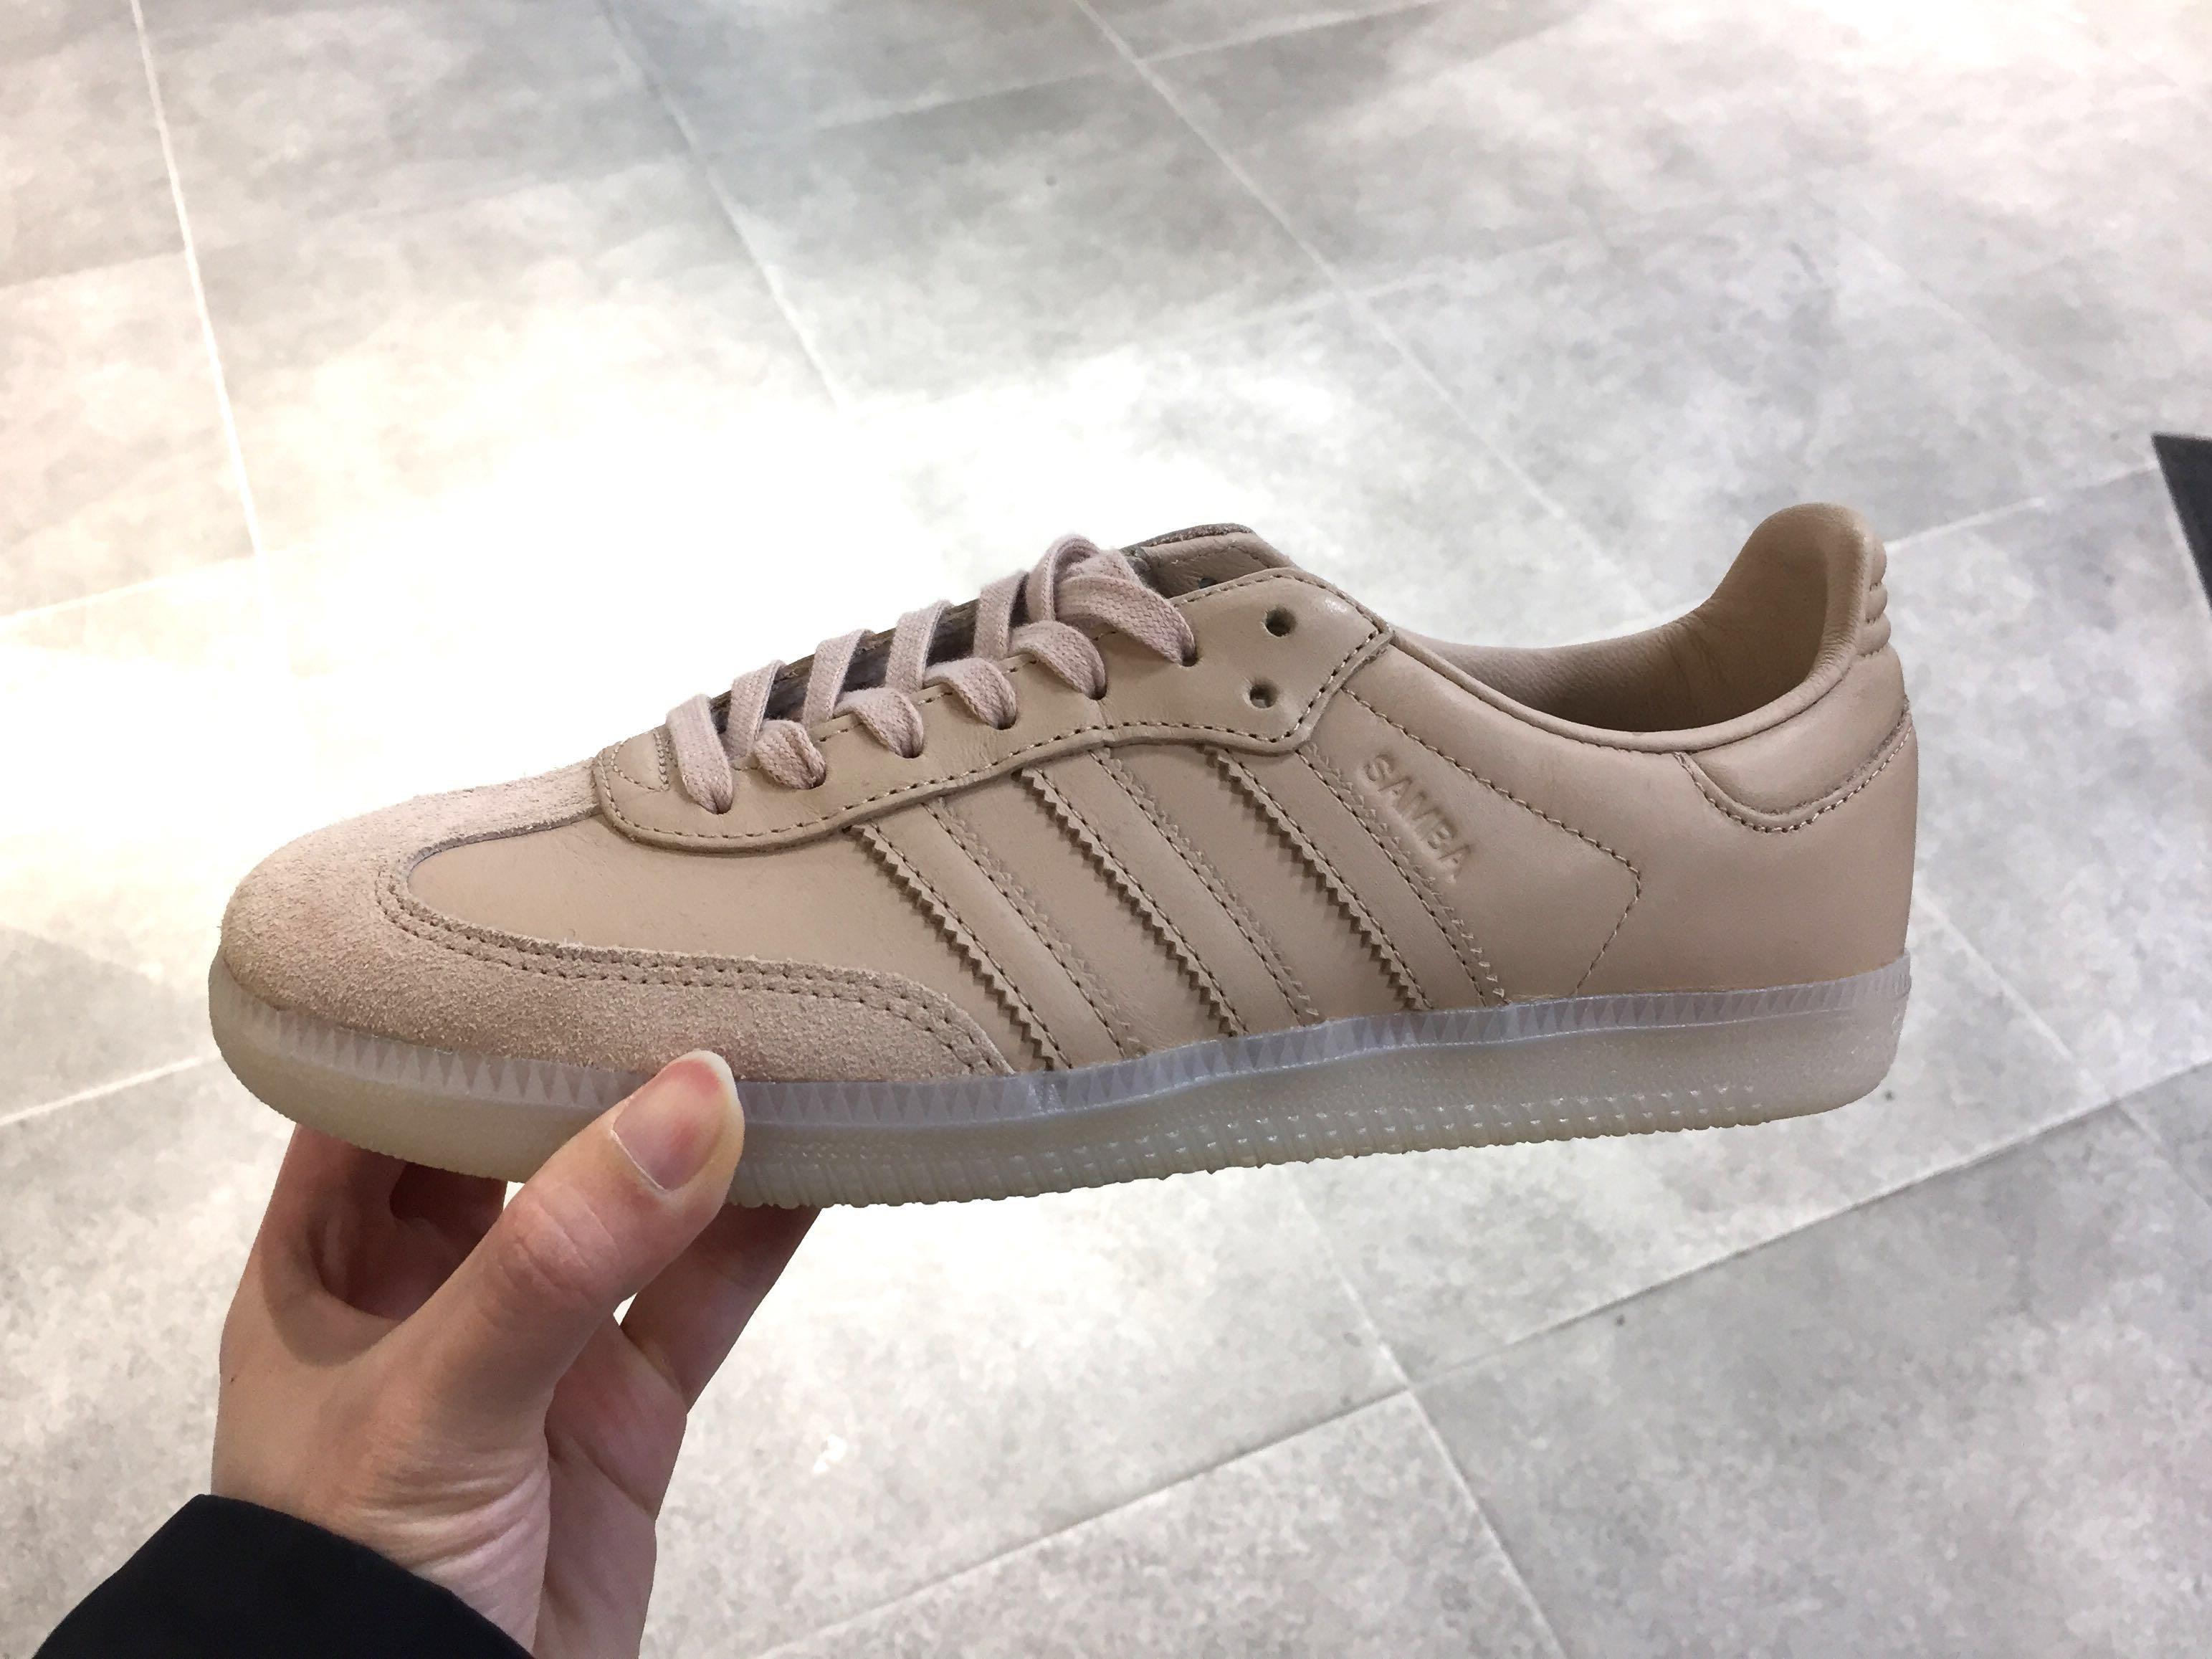 thin sole sneakers